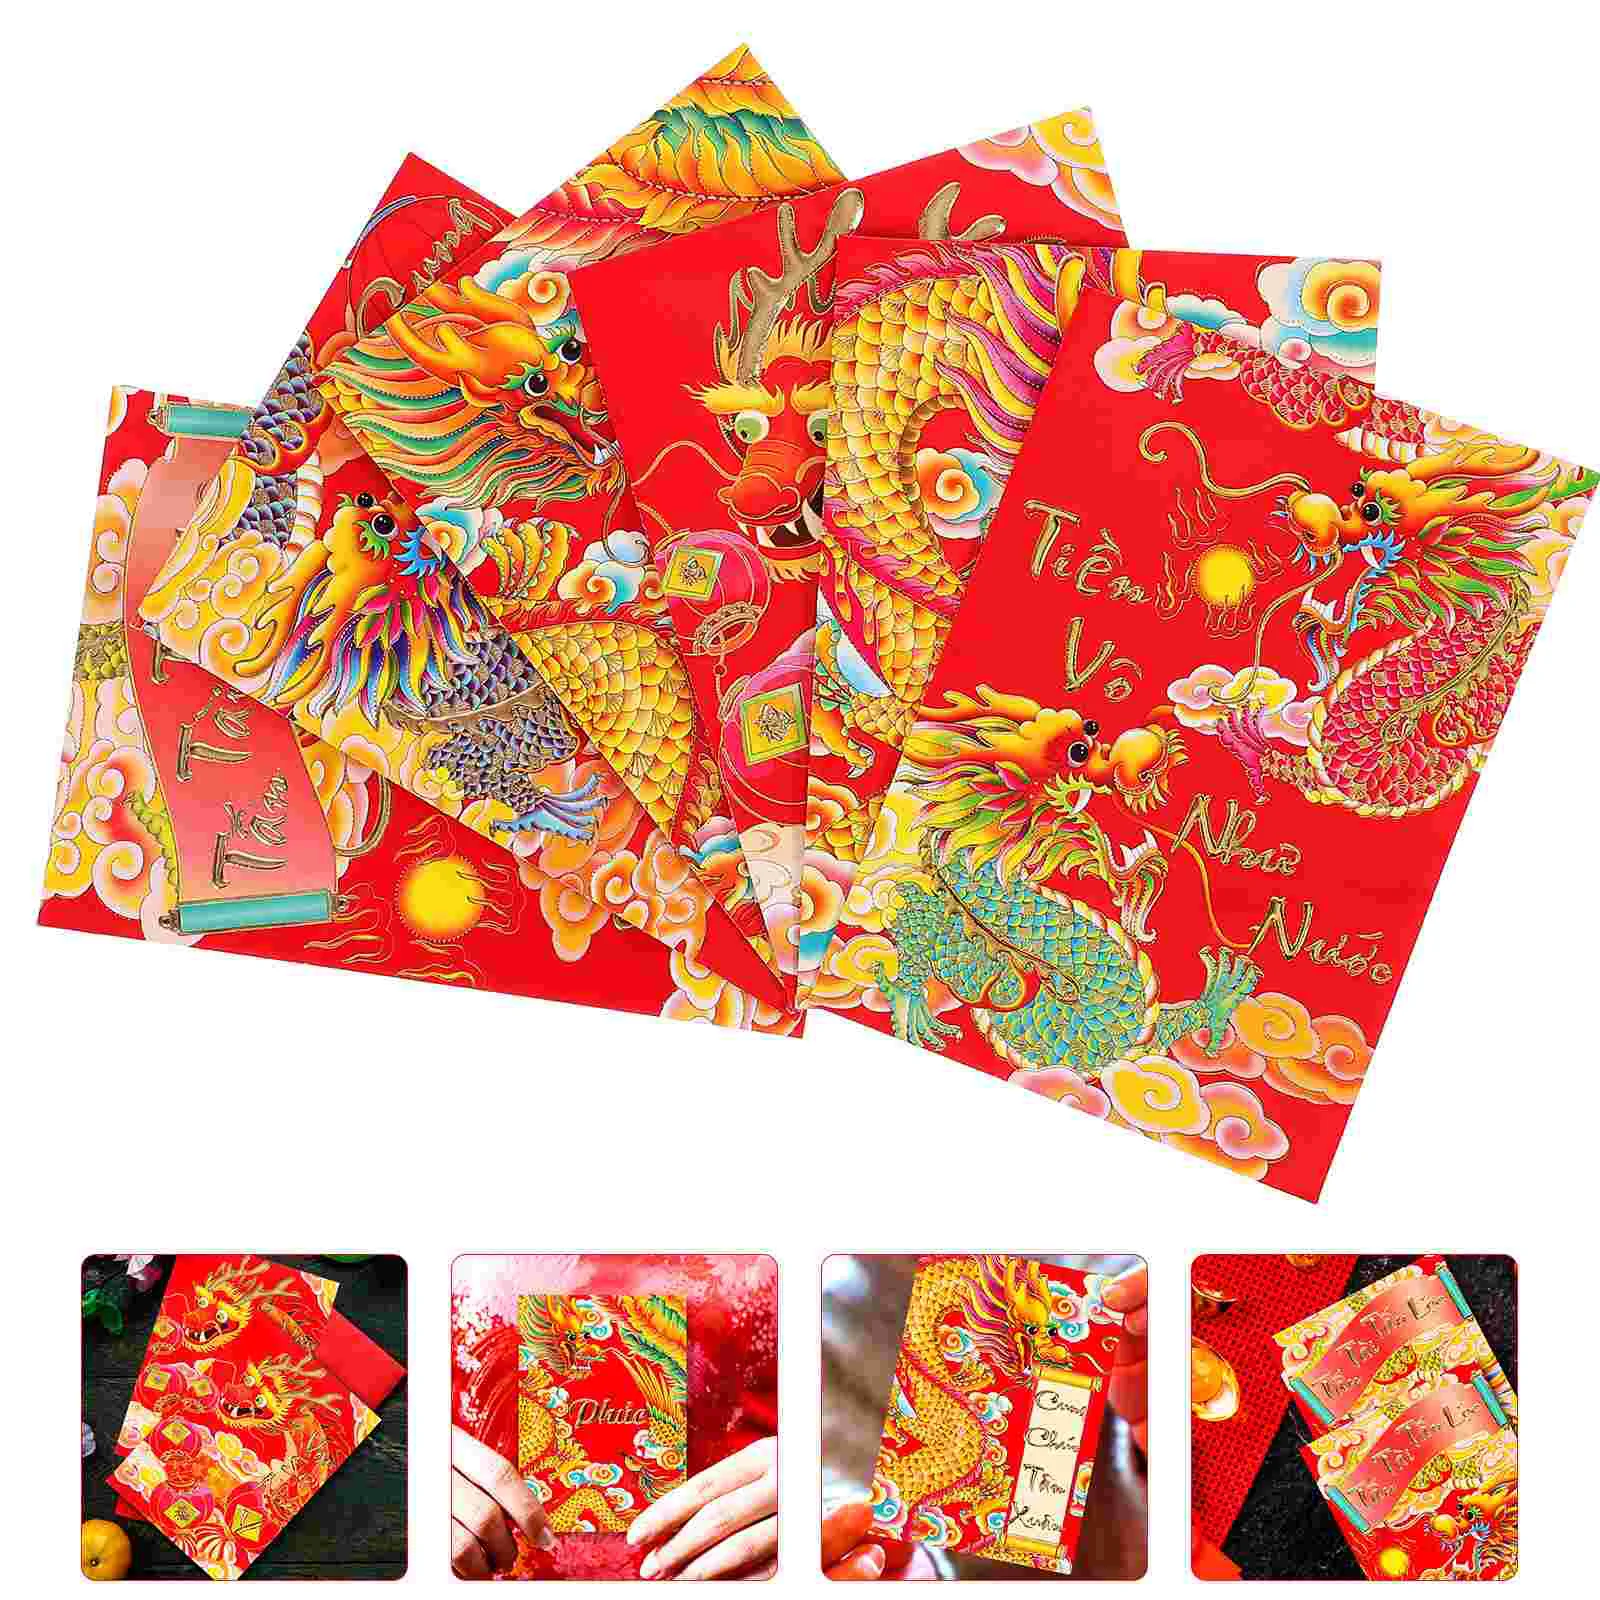 

6 Pcs Dragon Paper Red Packets Money Envelope Traditional Pocket New Year Chinese Decorative Envelopes Pattern Luck Bag Style